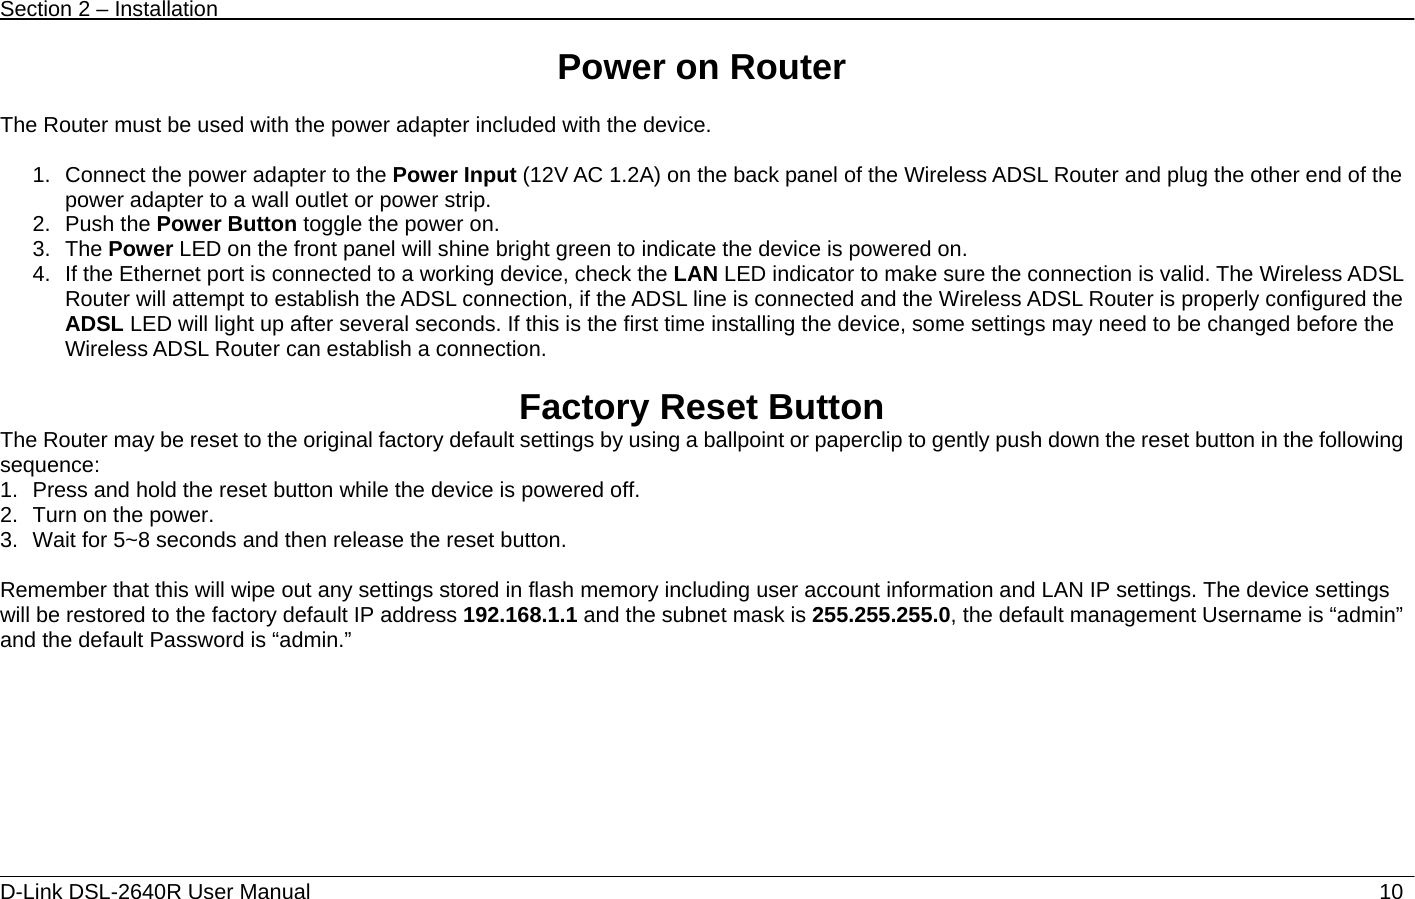 Section 2 – Installation   D-Link DSL-2640R User Manual                           10Power on Router  The Router must be used with the power adapter included with the device.  1.  Connect the power adapter to the Power Input (12V AC 1.2A) on the back panel of the Wireless ADSL Router and plug the other end of the power adapter to a wall outlet or power strip. 2. Push the Power Button toggle the power on. 3. The Power LED on the front panel will shine bright green to indicate the device is powered on. 4.  If the Ethernet port is connected to a working device, check the LAN LED indicator to make sure the connection is valid. The Wireless ADSL Router will attempt to establish the ADSL connection, if the ADSL line is connected and the Wireless ADSL Router is properly configured the ADSL LED will light up after several seconds. If this is the first time installing the device, some settings may need to be changed before the Wireless ADSL Router can establish a connection.      Factory Reset Button The Router may be reset to the original factory default settings by using a ballpoint or paperclip to gently push down the reset button in the following sequence:  1.  Press and hold the reset button while the device is powered off. 2.  Turn on the power. 3.  Wait for 5~8 seconds and then release the reset button.    Remember that this will wipe out any settings stored in flash memory including user account information and LAN IP settings. The device settings will be restored to the factory default IP address 192.168.1.1 and the subnet mask is 255.255.255.0, the default management Username is “admin” and the default Password is “admin.”       